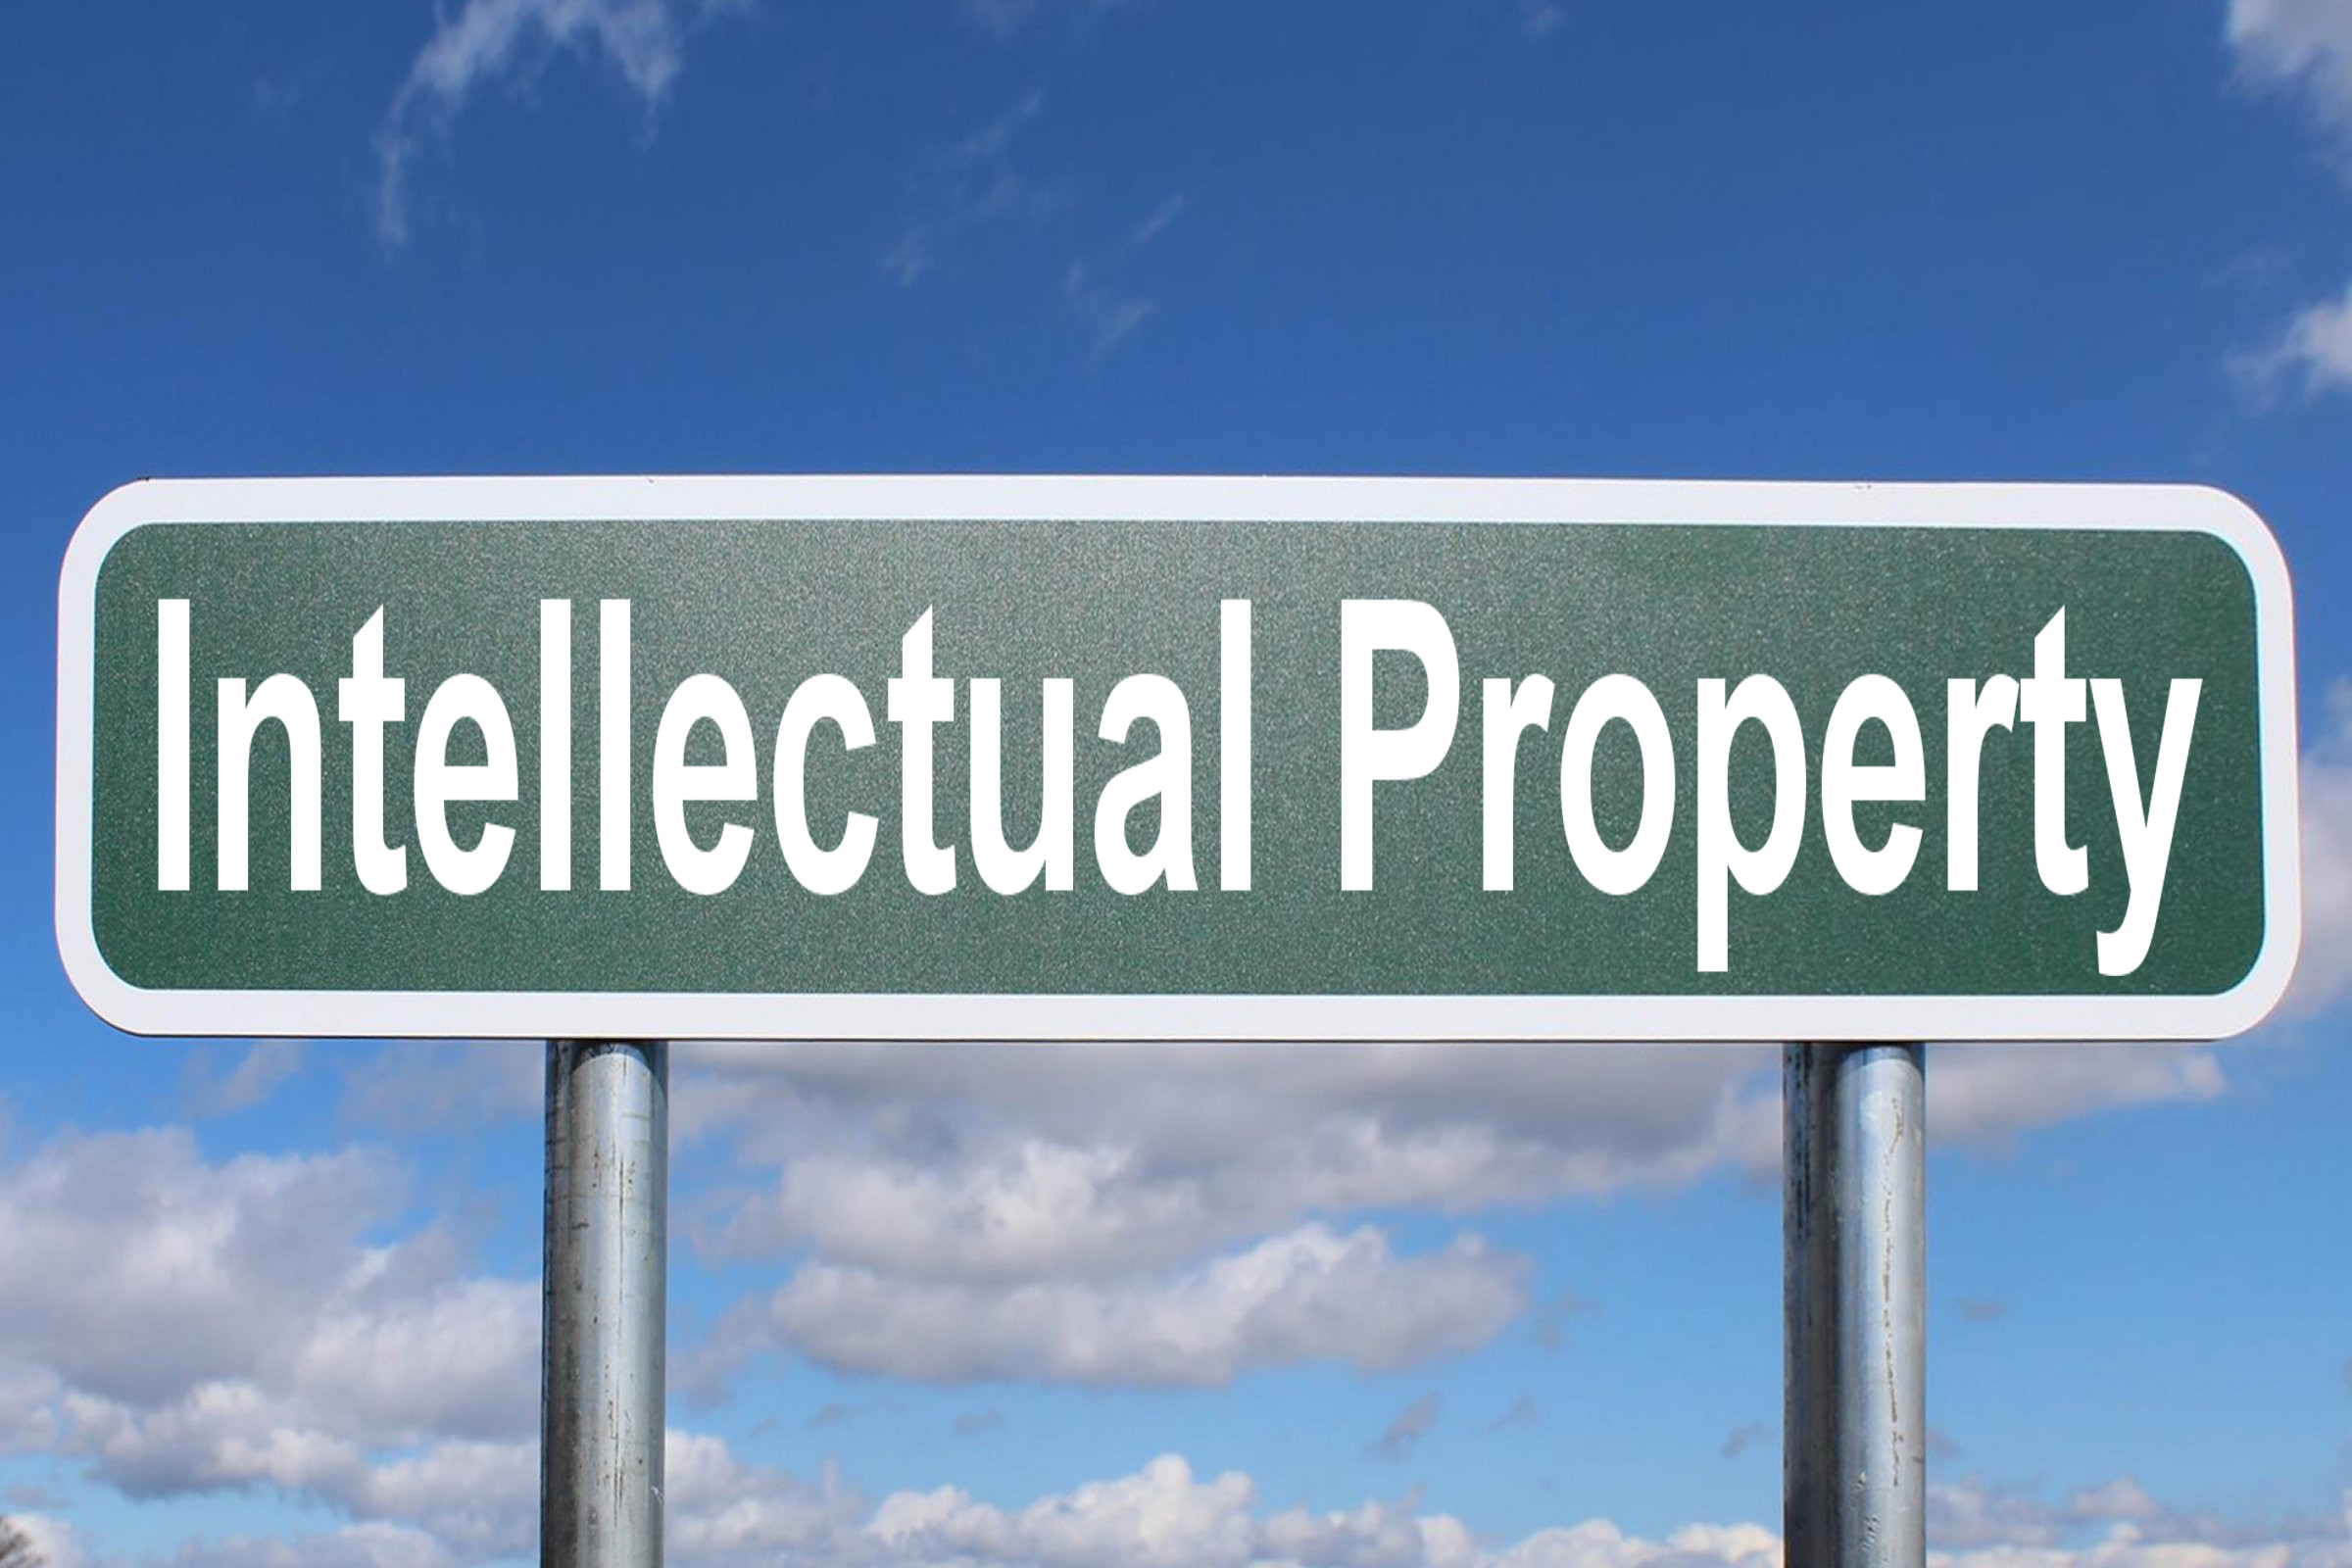 intellectual-property-free-of-charge-creative-commons-highway-sign-image